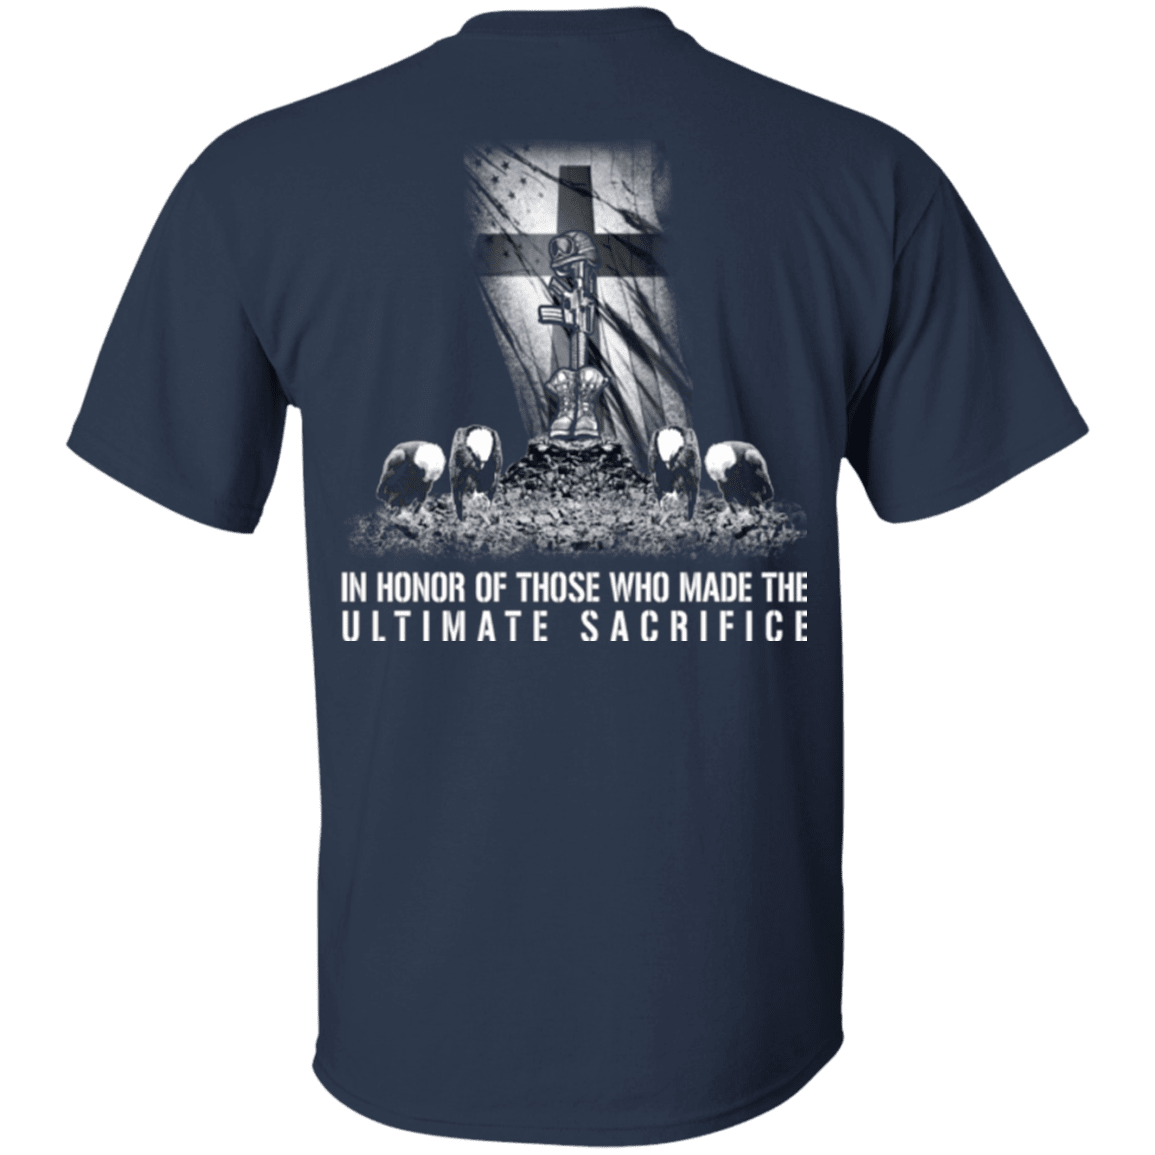 Military T-Shirt "Veteran - In Honor of Those Who Made The Ultimate Sacrifice"-TShirt-General-Veterans Nation